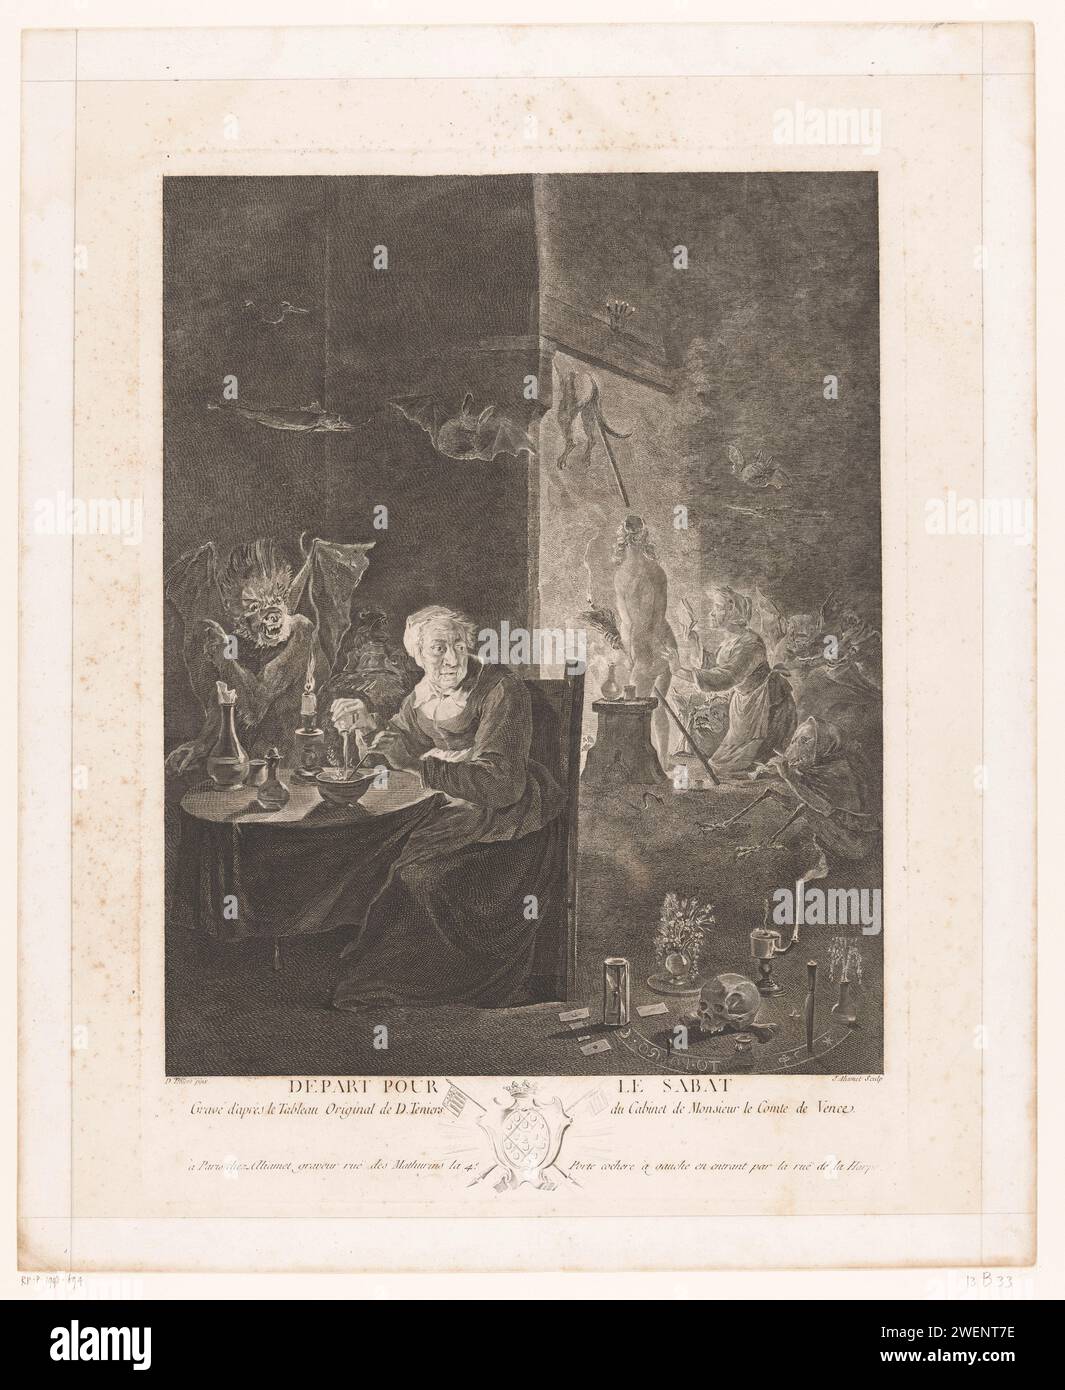 Heksensabbat, Jacques Aliamet, After David Teniers, 1755 print   paper etching / engraving worshipping the devil (often in the form of a he-goat) during witches' sabbath. old woman. devil(s) and demons. open hearth, fire-place Stock Photo